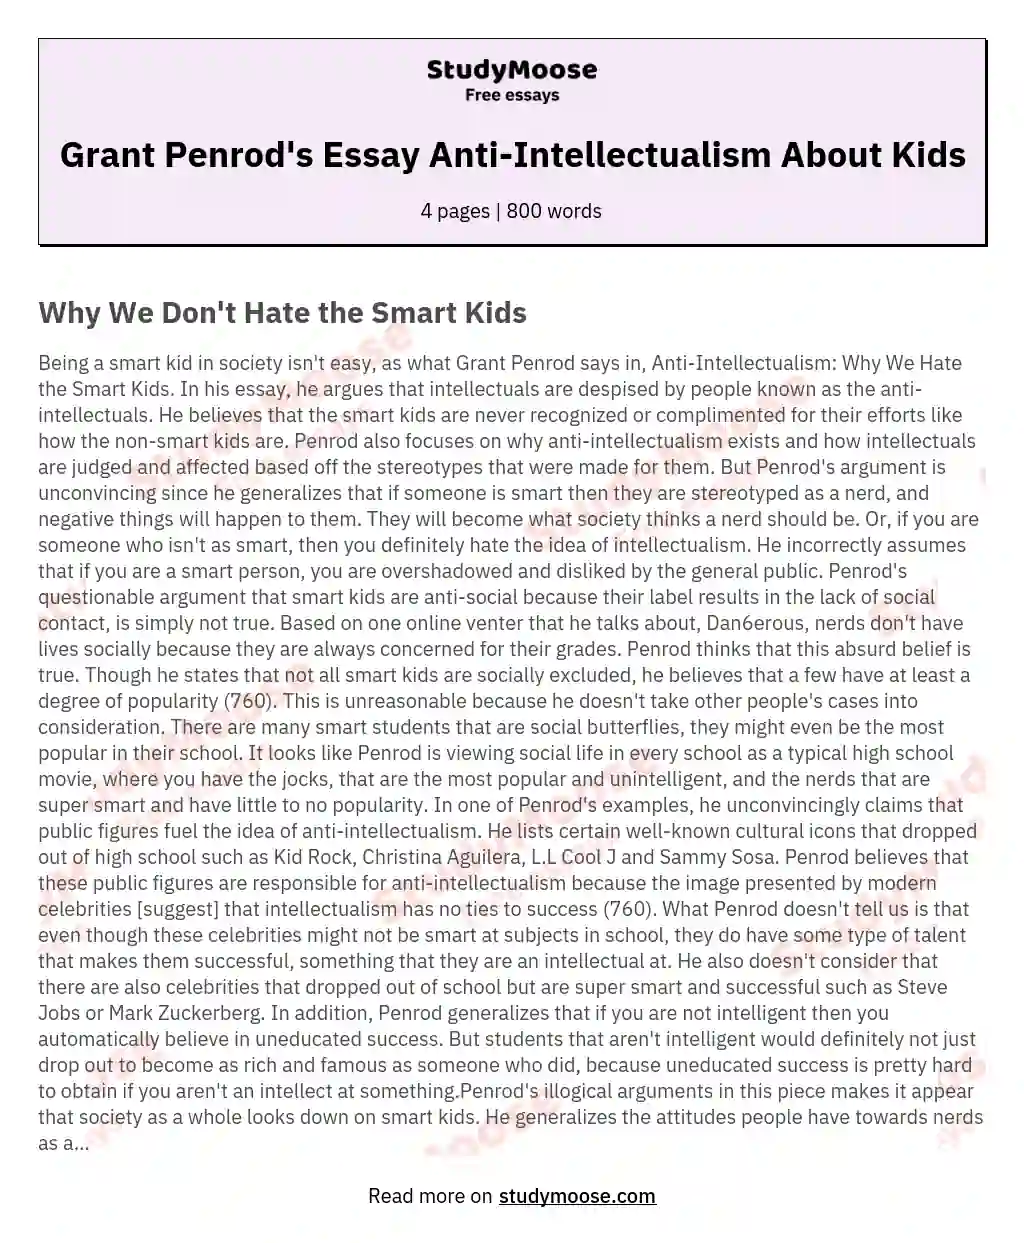 Grant Penrod's Essay Anti-Intellectualism About Kids essay